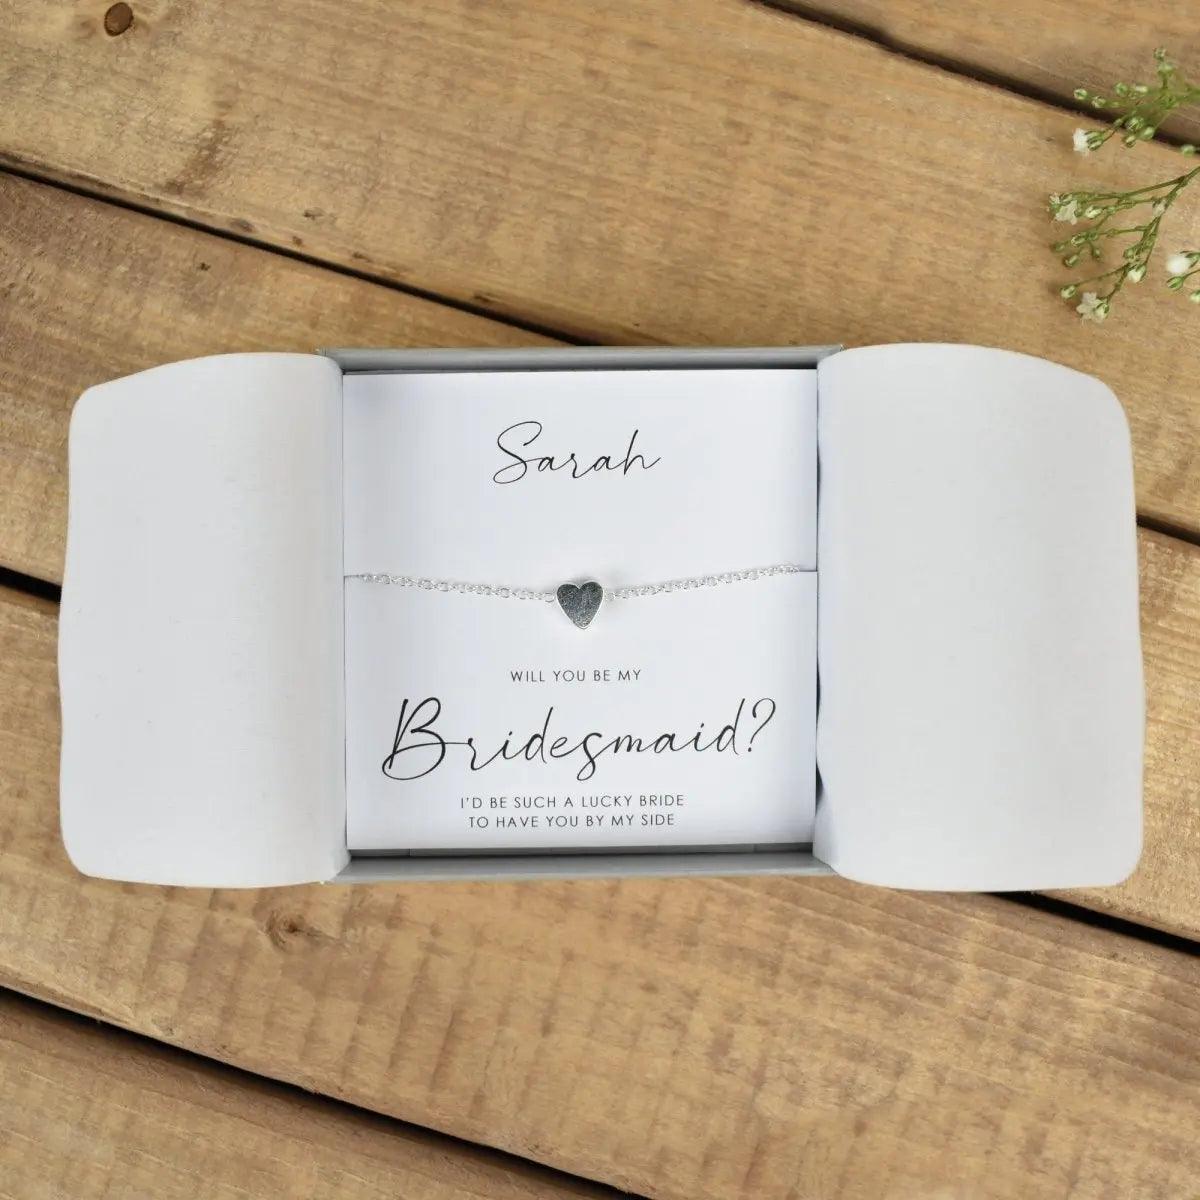 Personalised Bridesmaid Necklace, Will You Be My Bridesmaid, Bridesmaid Proposal Gift, Necklace Gift, Bridesmaid Favour, Maid of Honour Gift